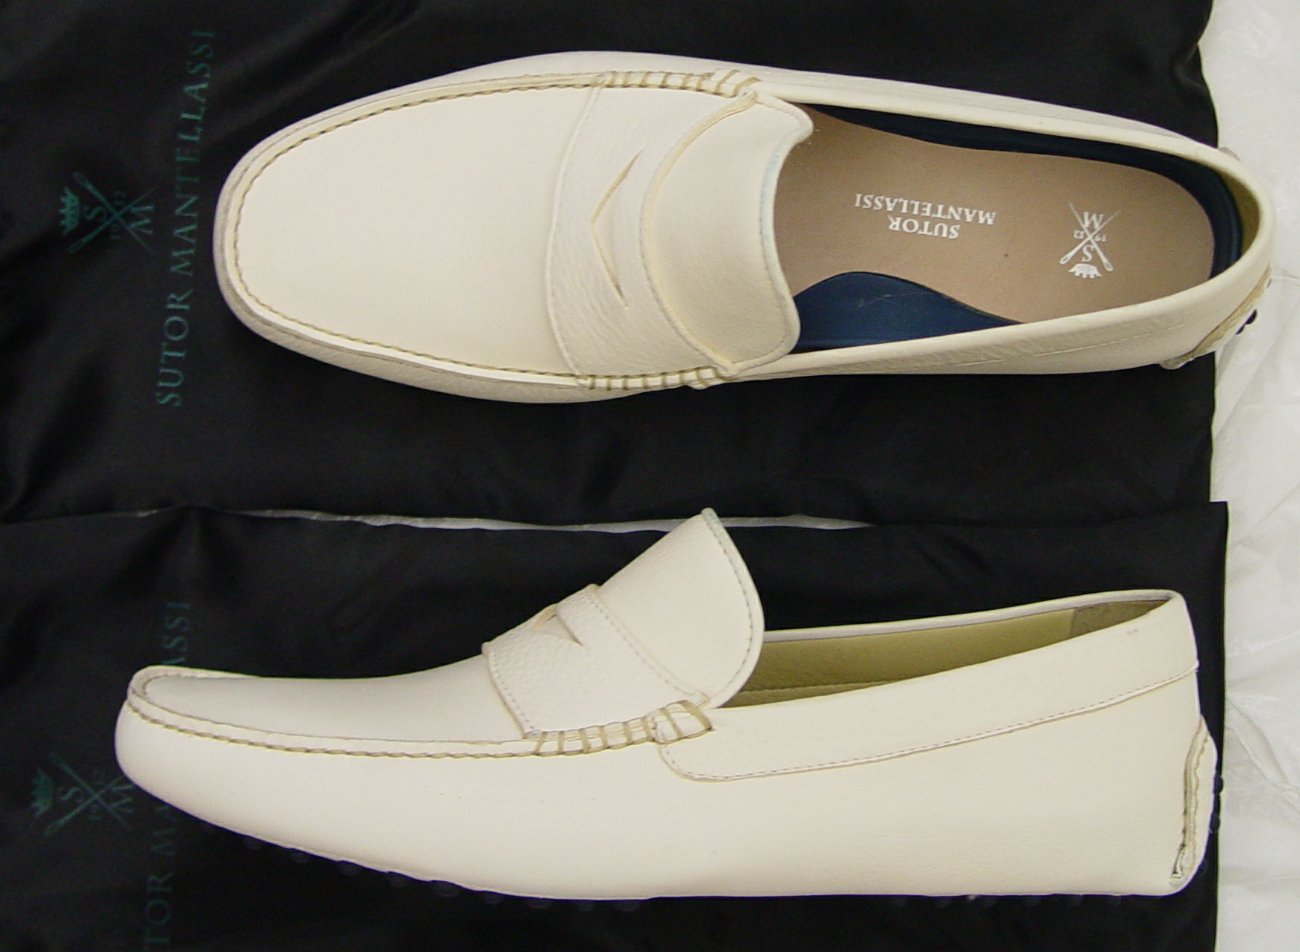 SUTOR MANTELLASSI SHOES $595 IVORY PEBBLED SOLE HANDMADE PENNY DRIVERS ...